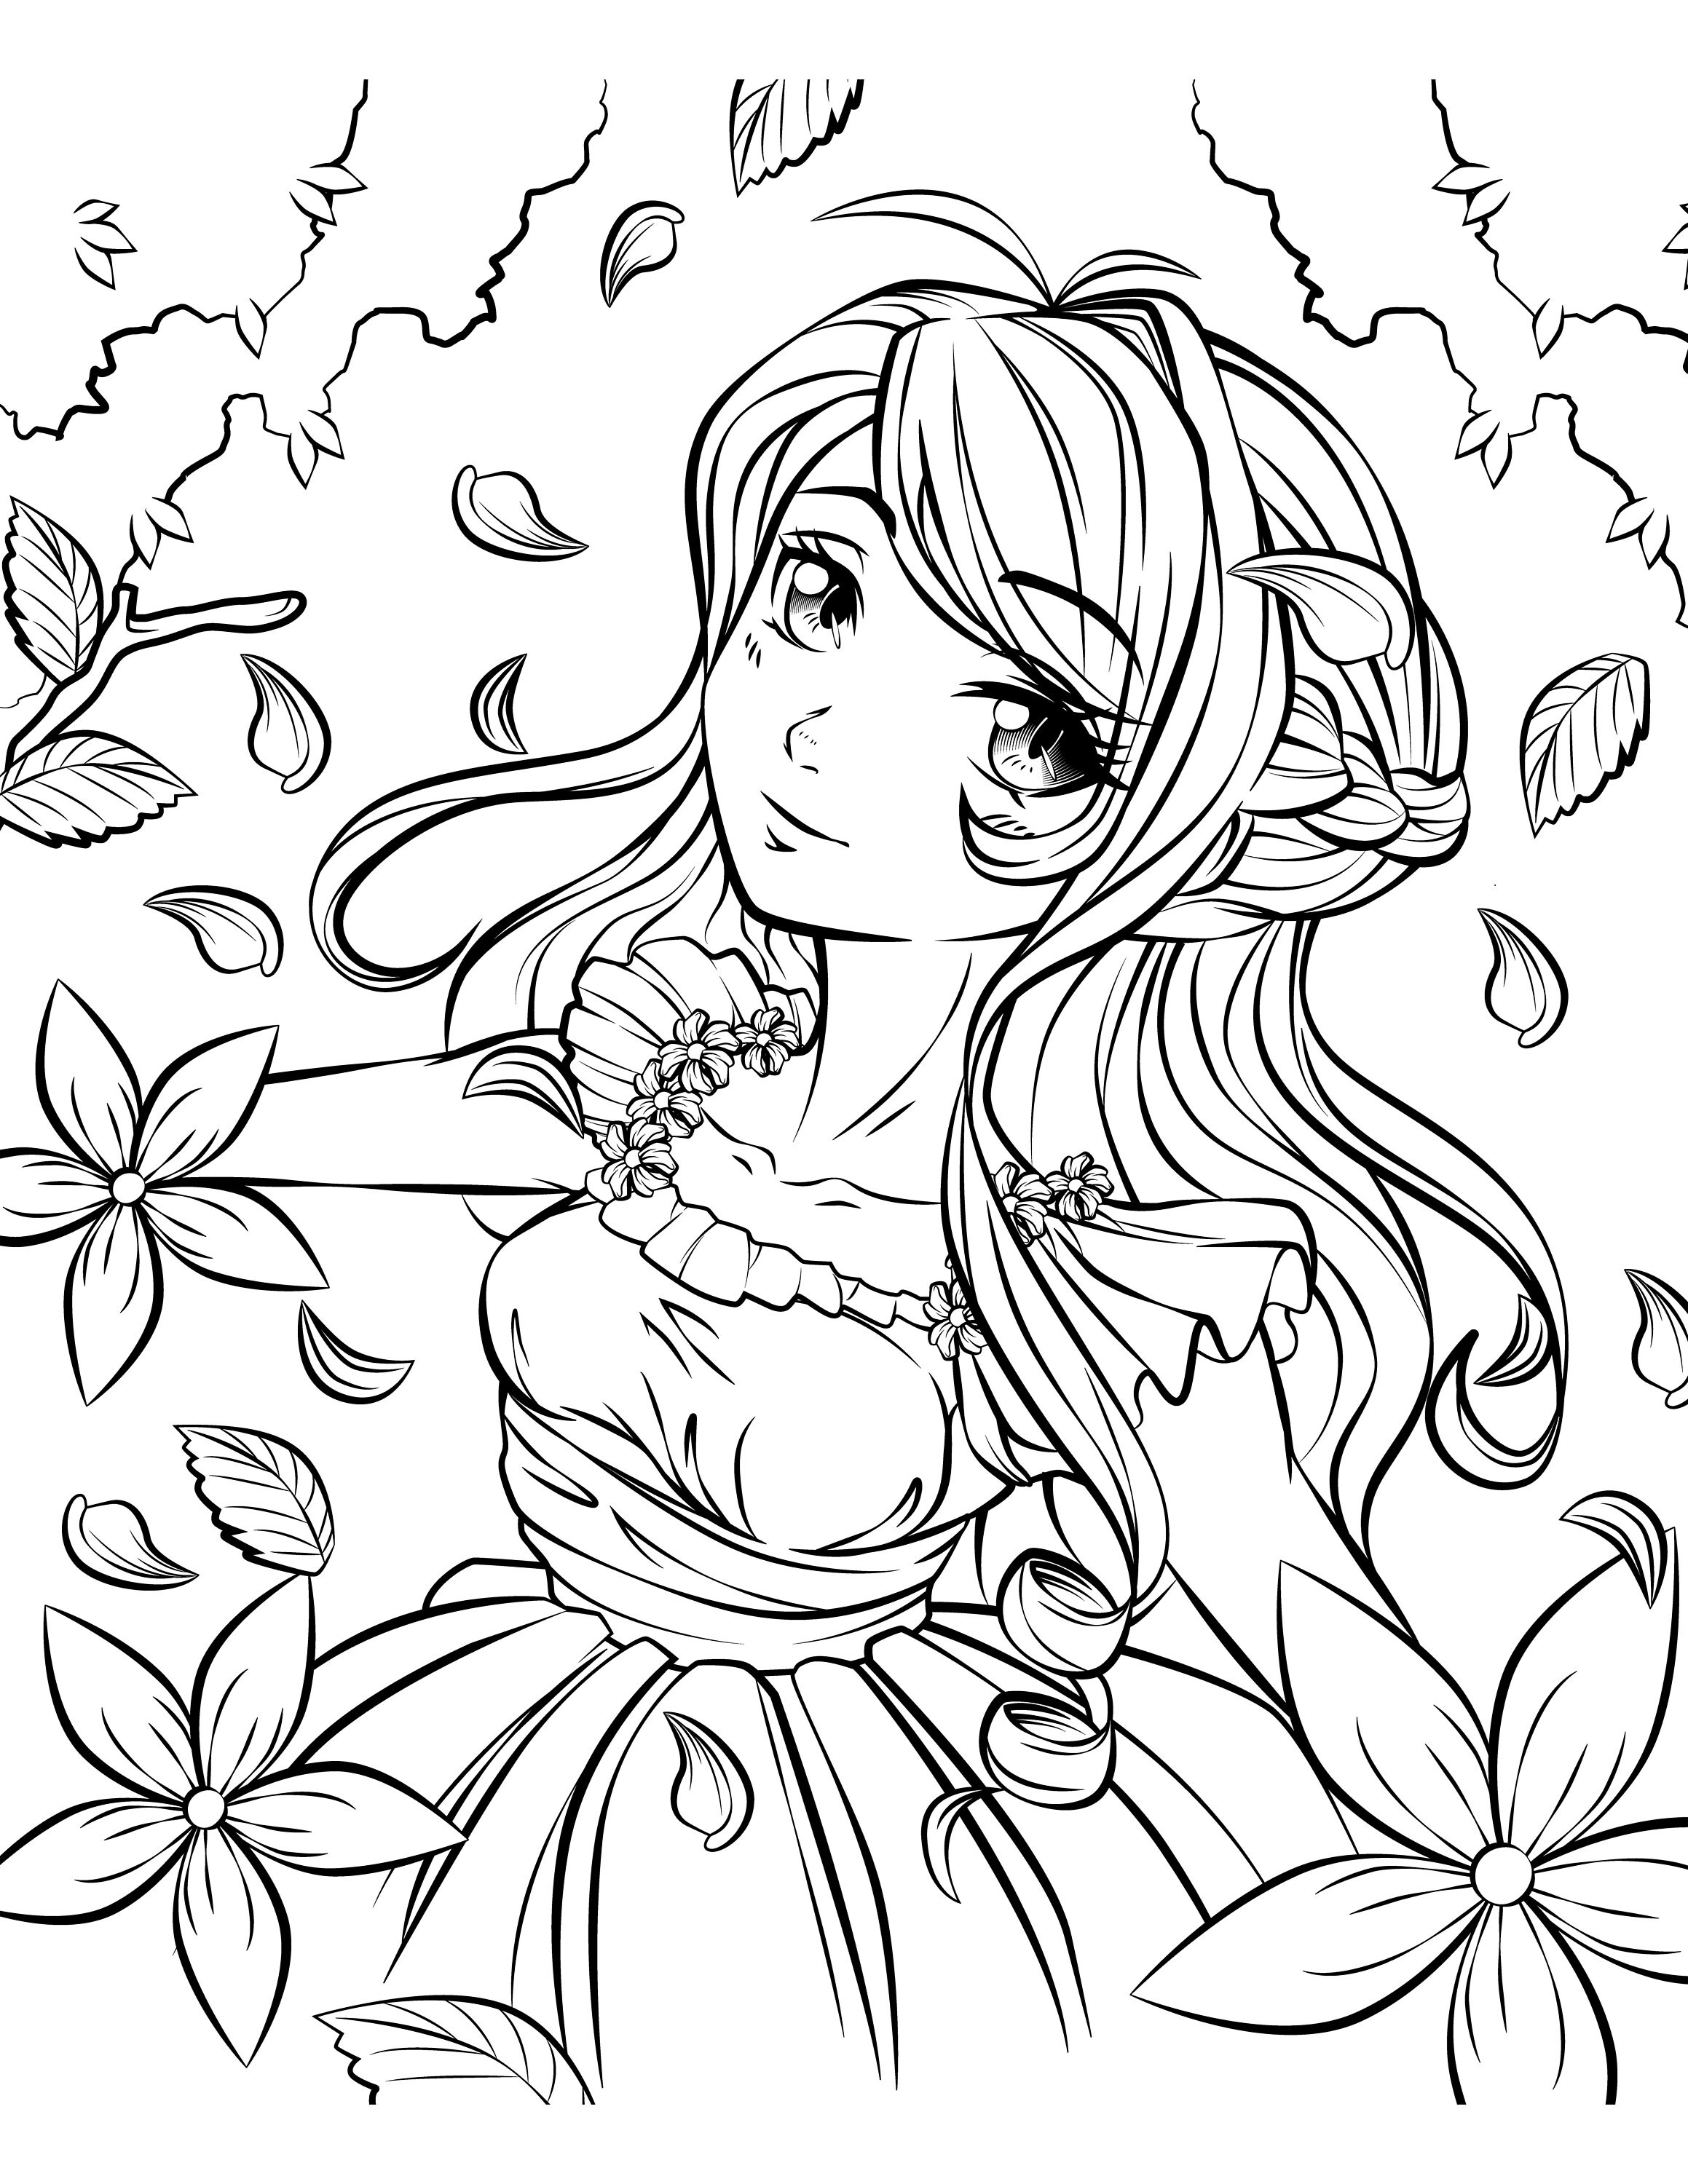 Anime Coloring Pages Gift For Anime Lover Coloring Pages For Kids Girl –  Mode Art Design